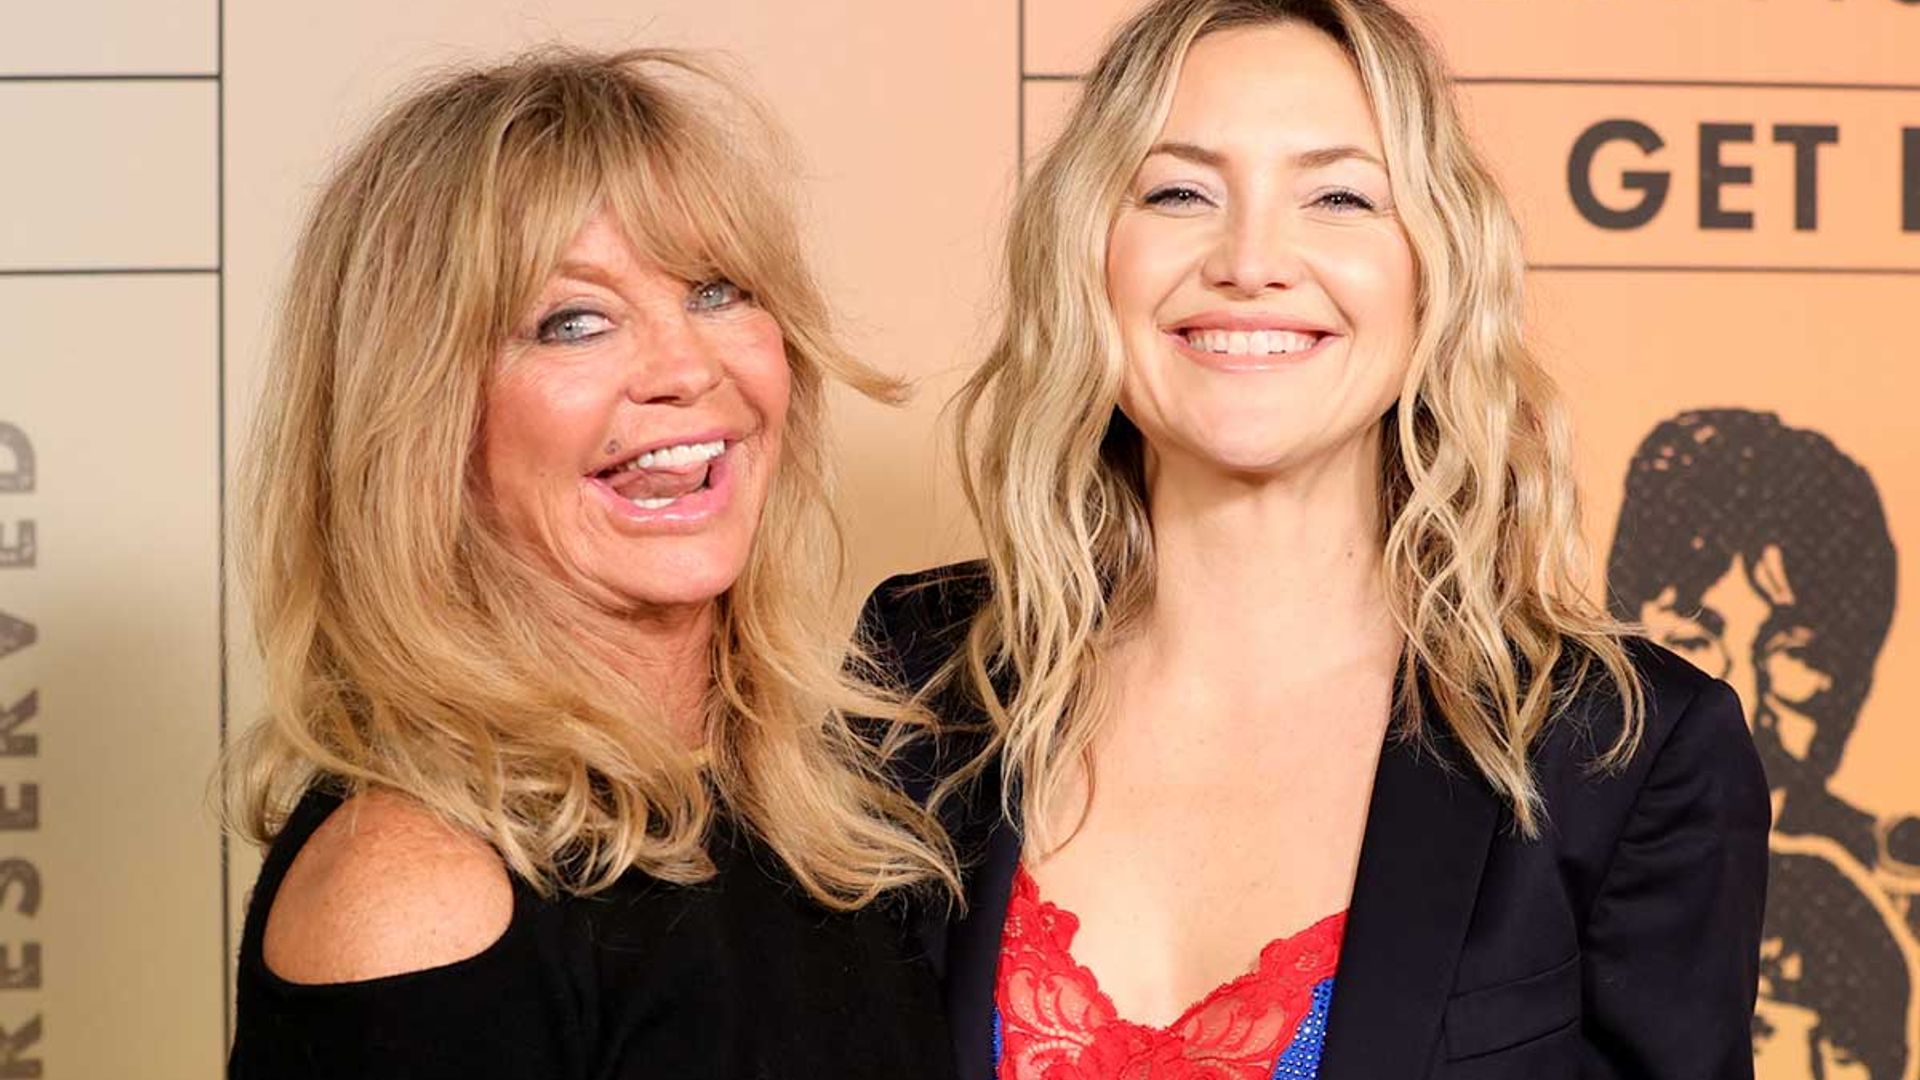 Kate Hudson and Goldie Hawn could be twins on rare glam night out